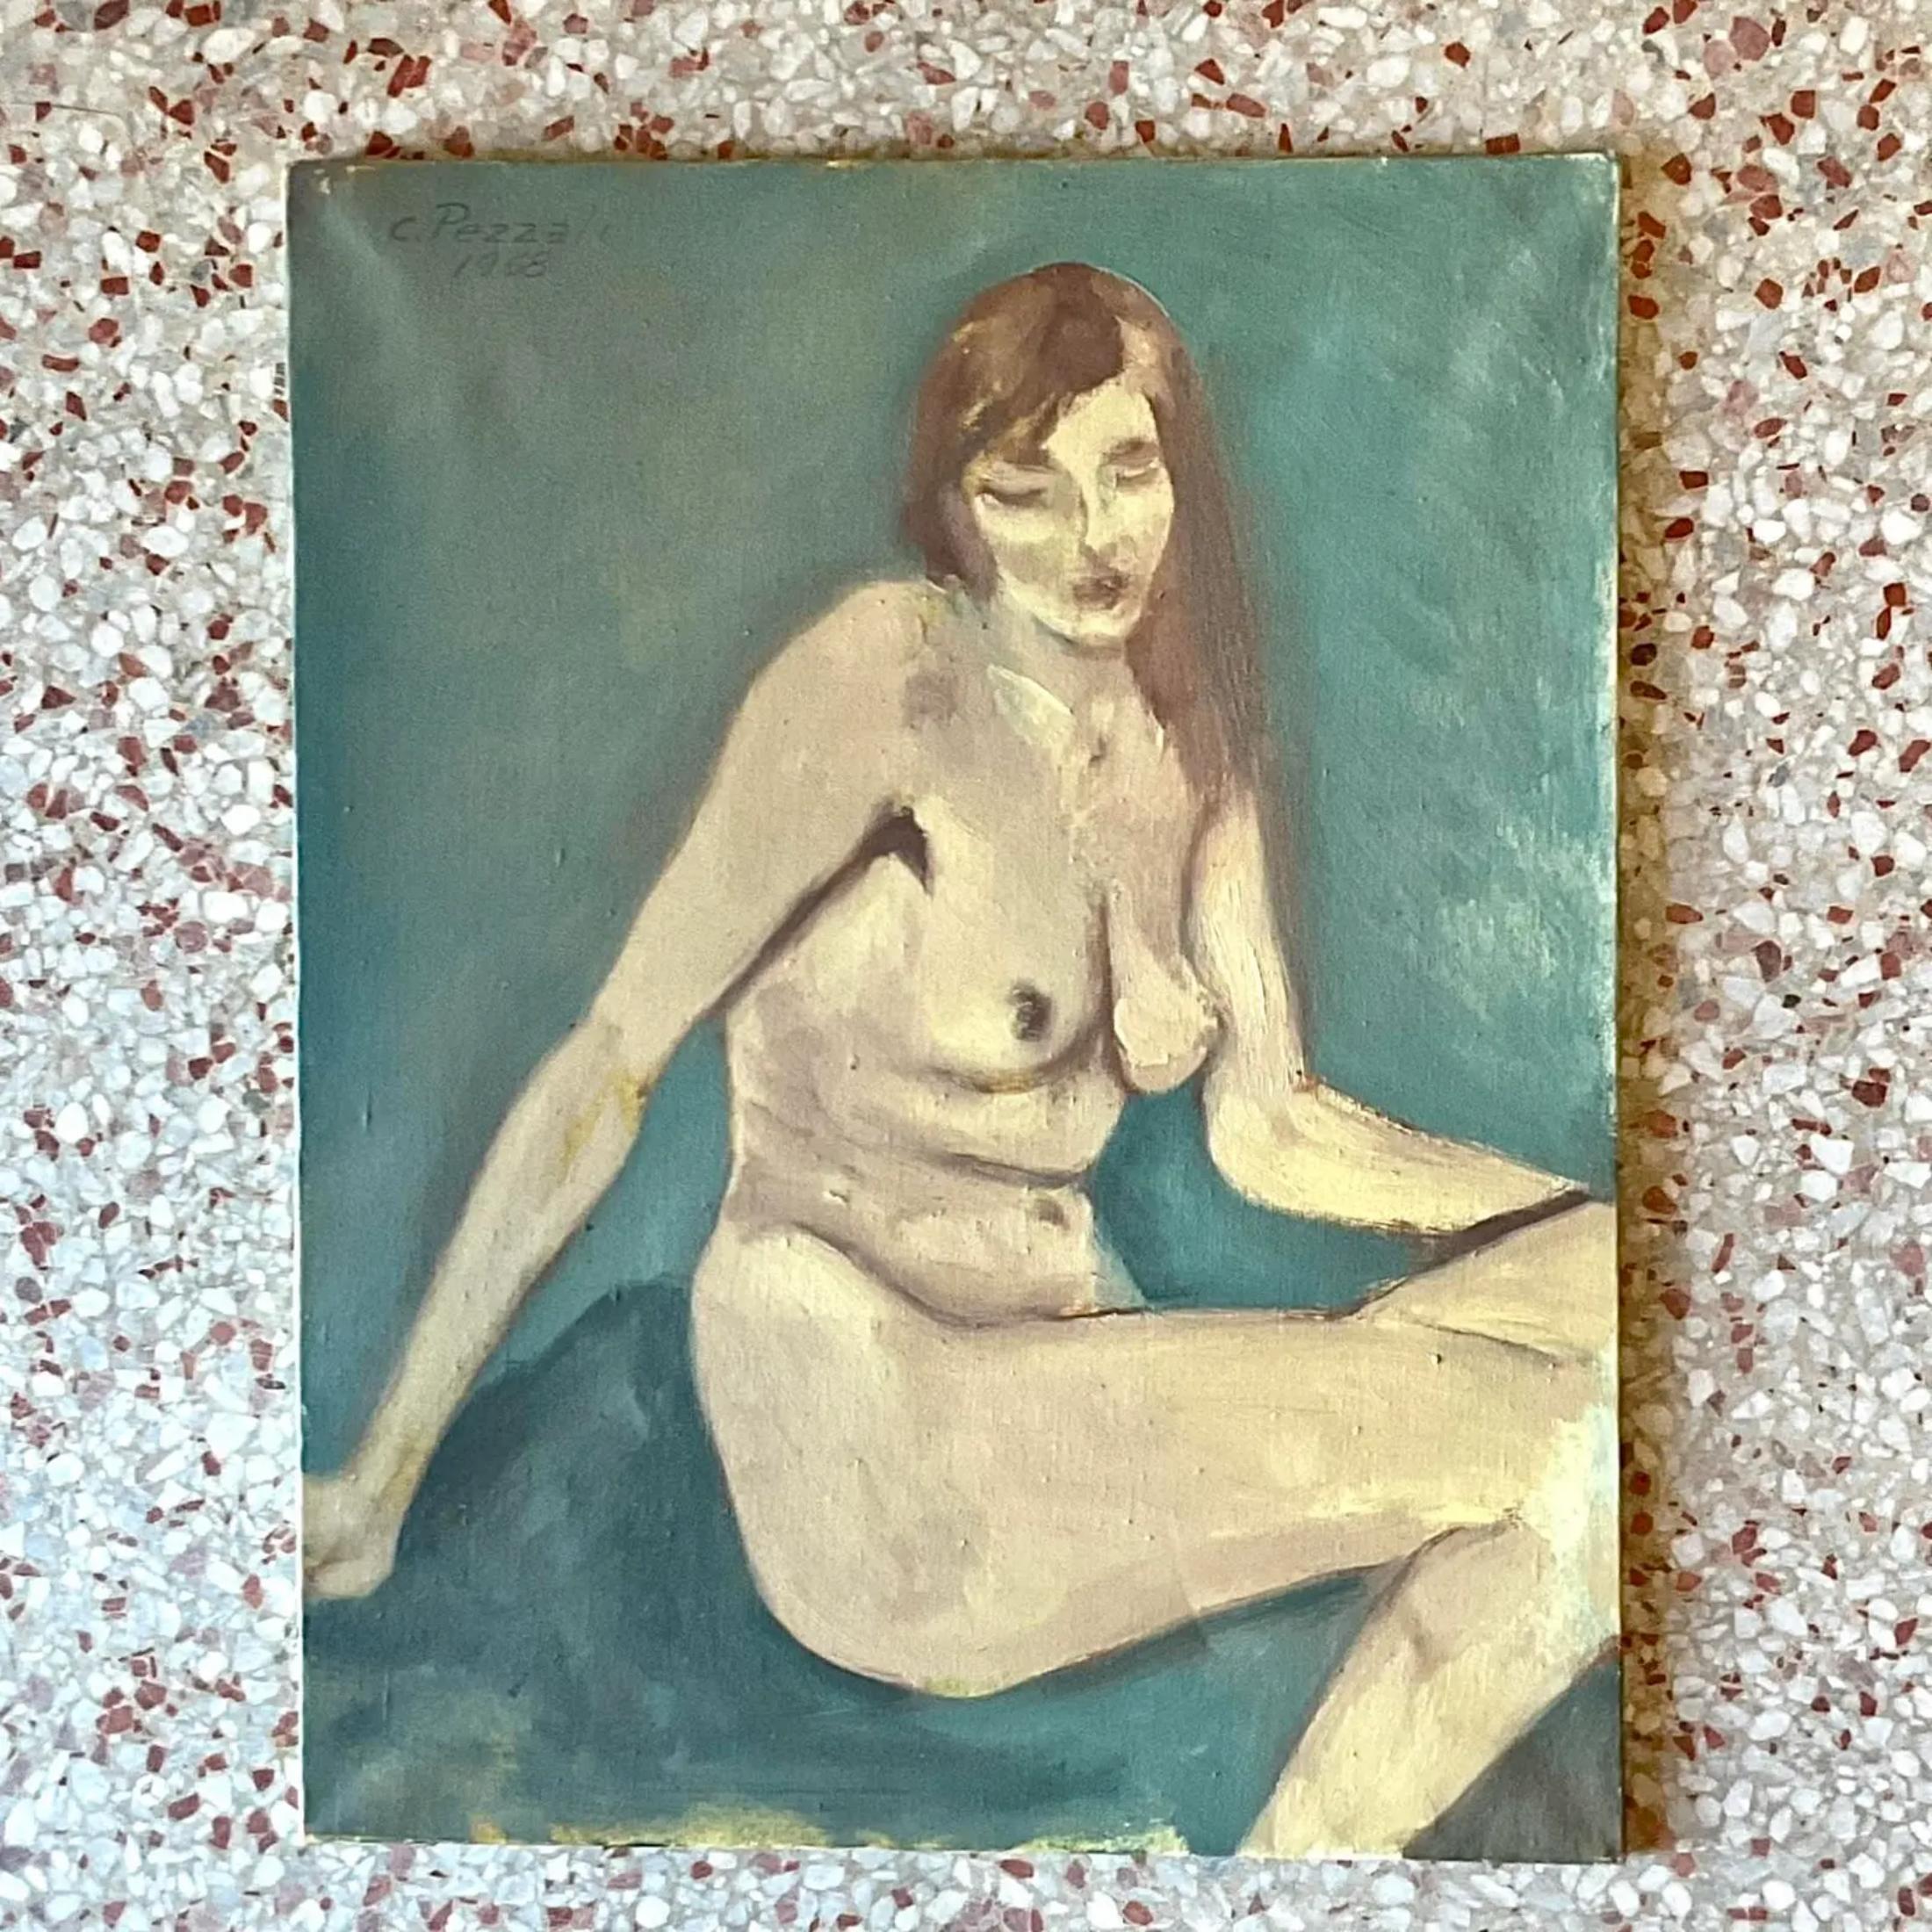 A stunning vintage Boho original oil on canvas. A chic Italian 1960s painting signed by the artist. An Abstract Figural composition in deep muted colors. Acquired from a Palm Beach estate